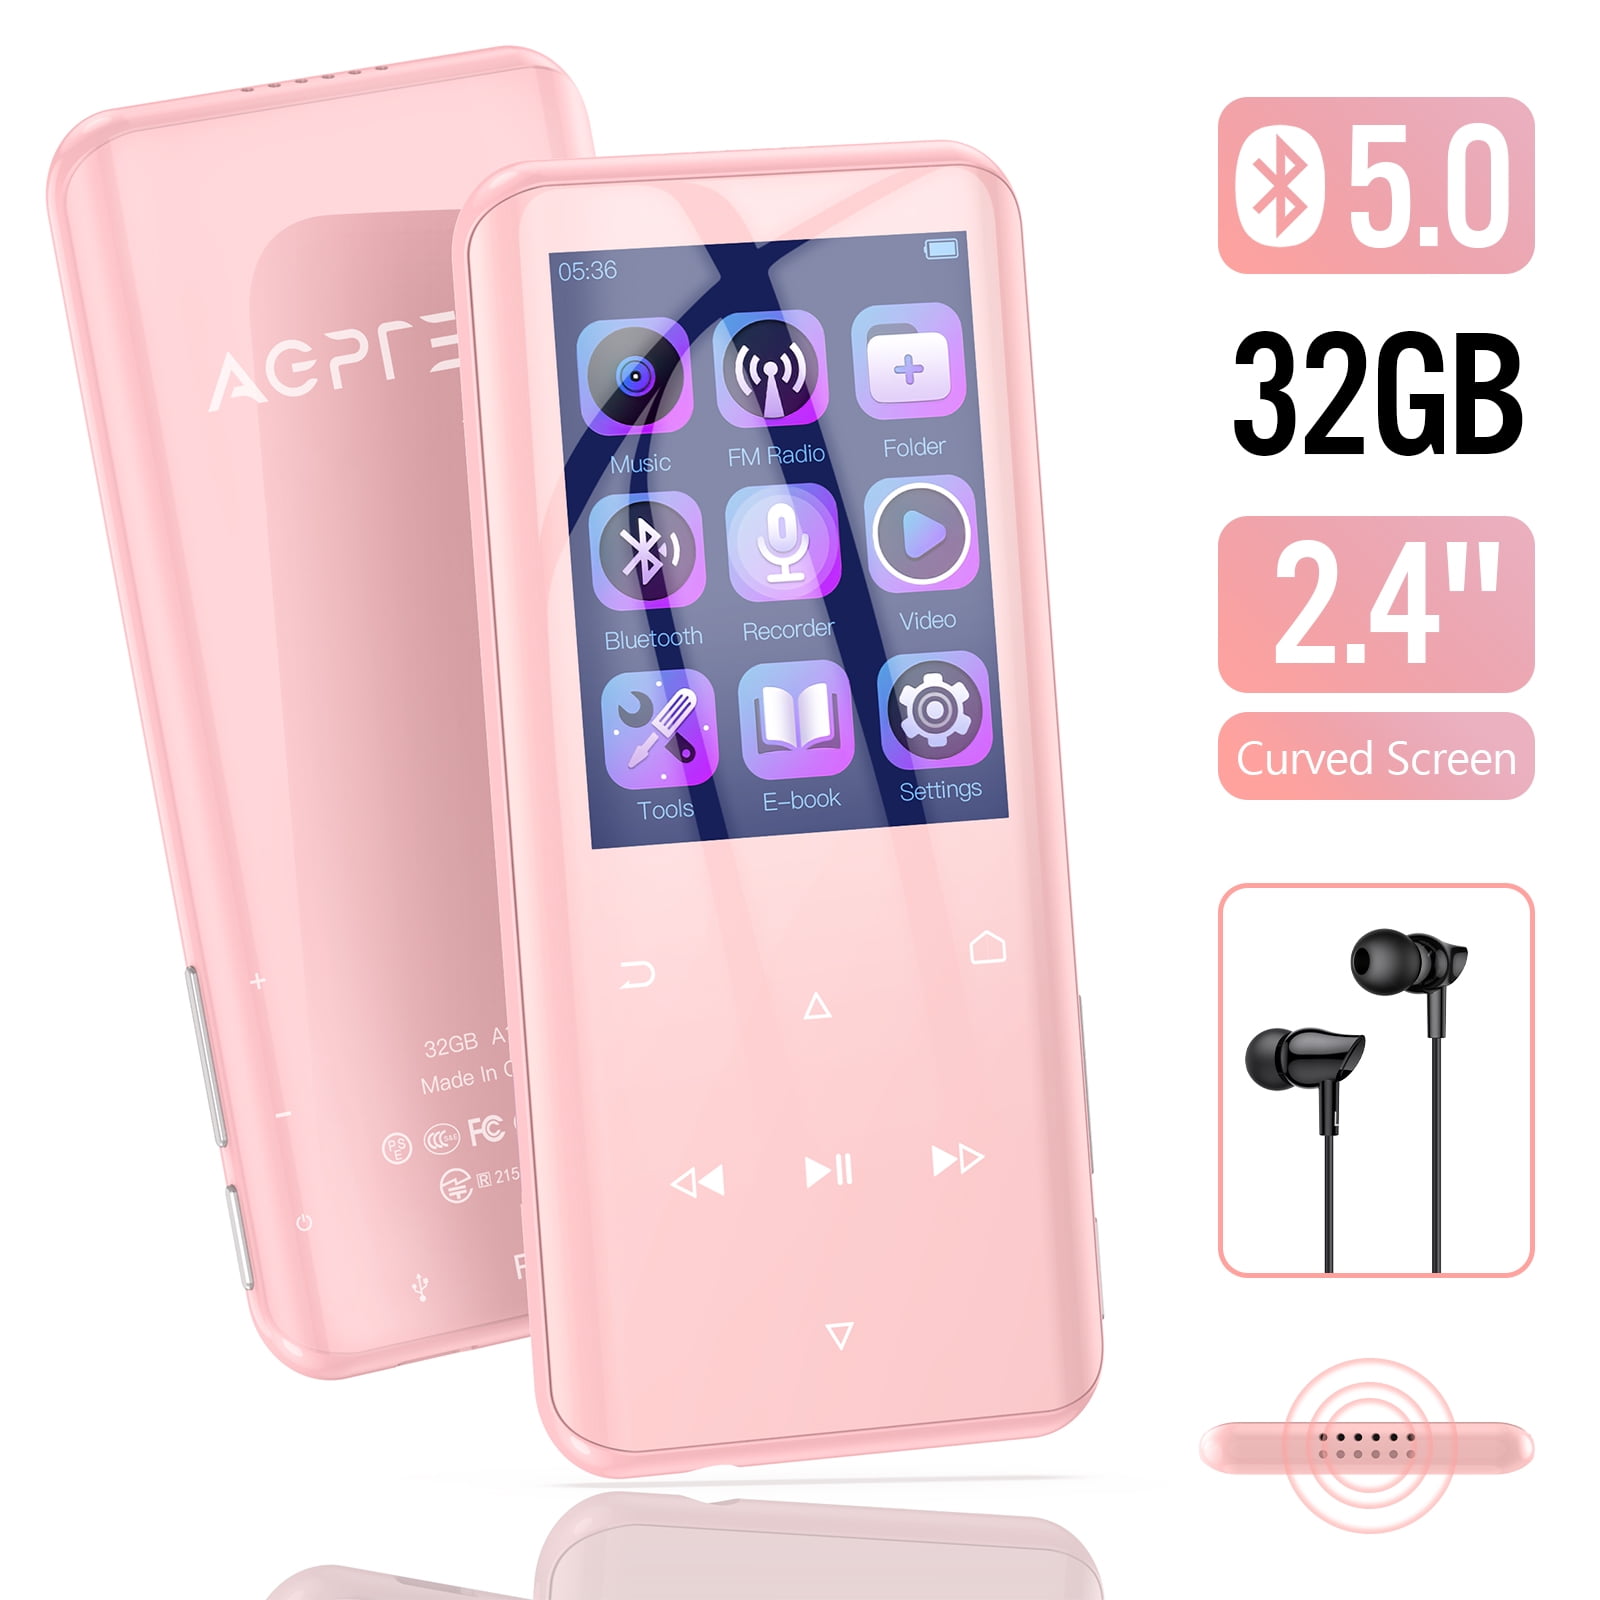 AGPTEK 32GB MP3/Video Player with Voice Recorder, Pink, A17X